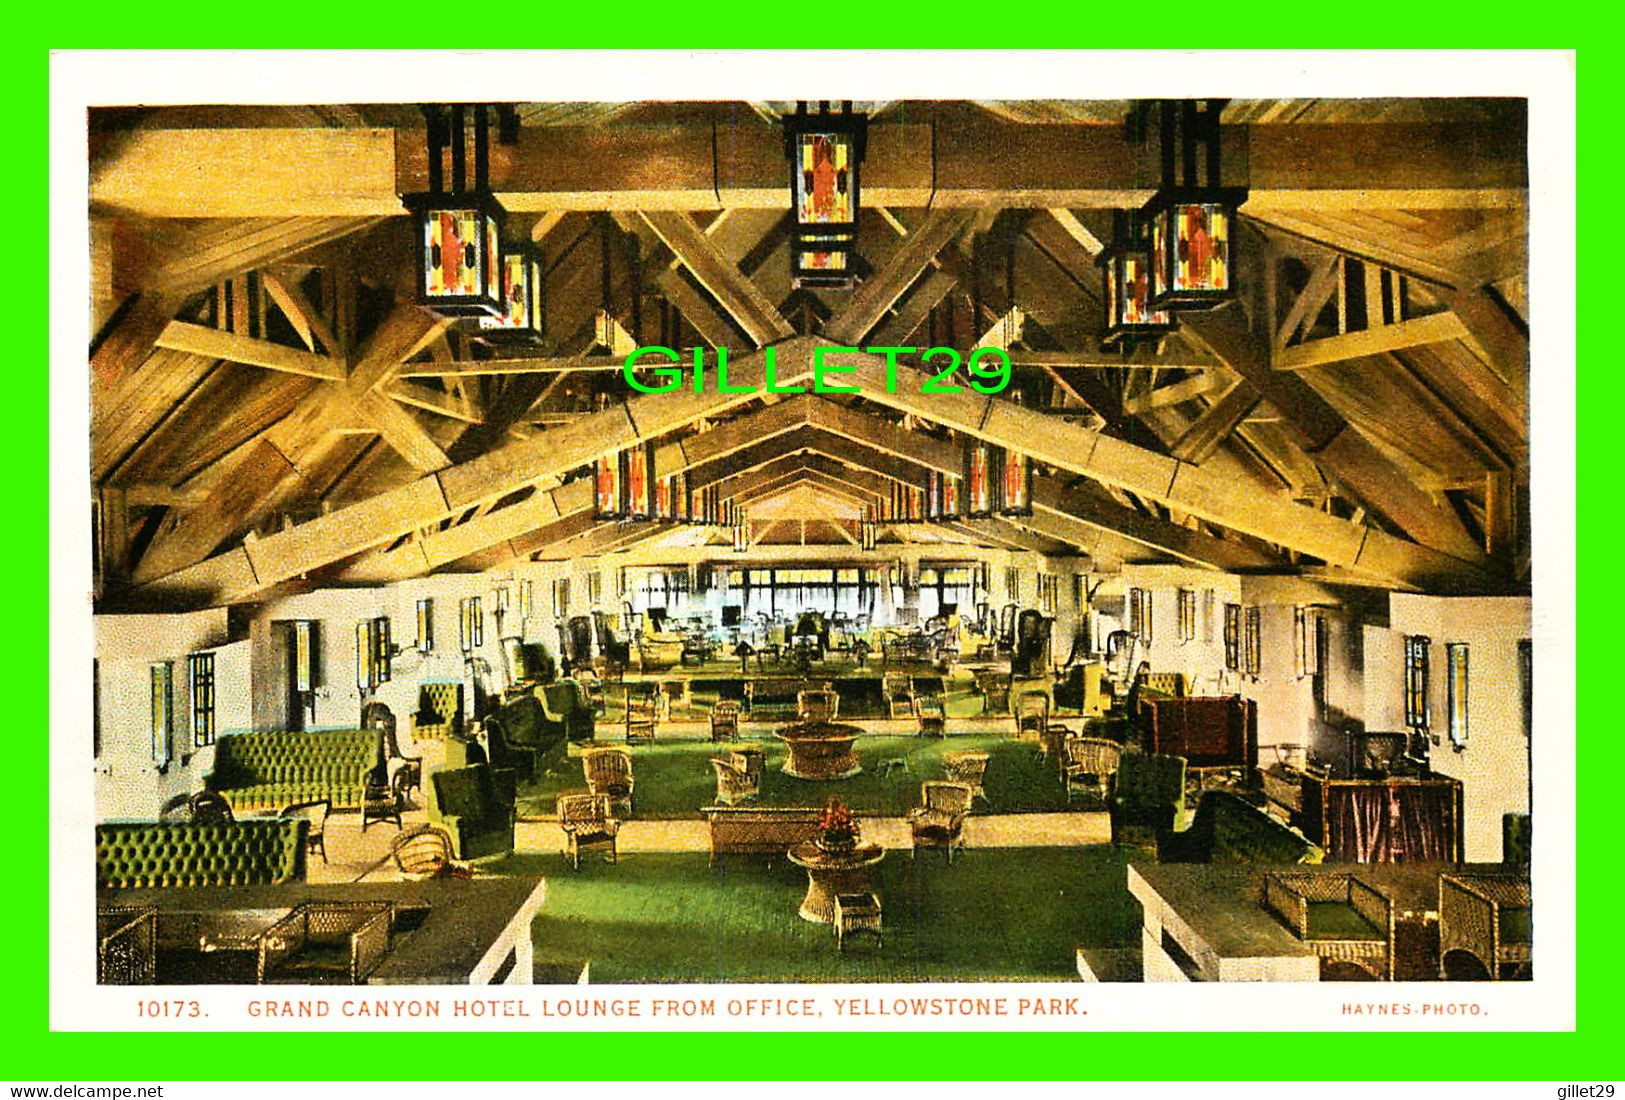 YELLOWSTONE, WY - GRAND CANYON HOTEL LOUNGE FROM OFFICE - PUB. BY J. E. HAYNES - - Yellowstone